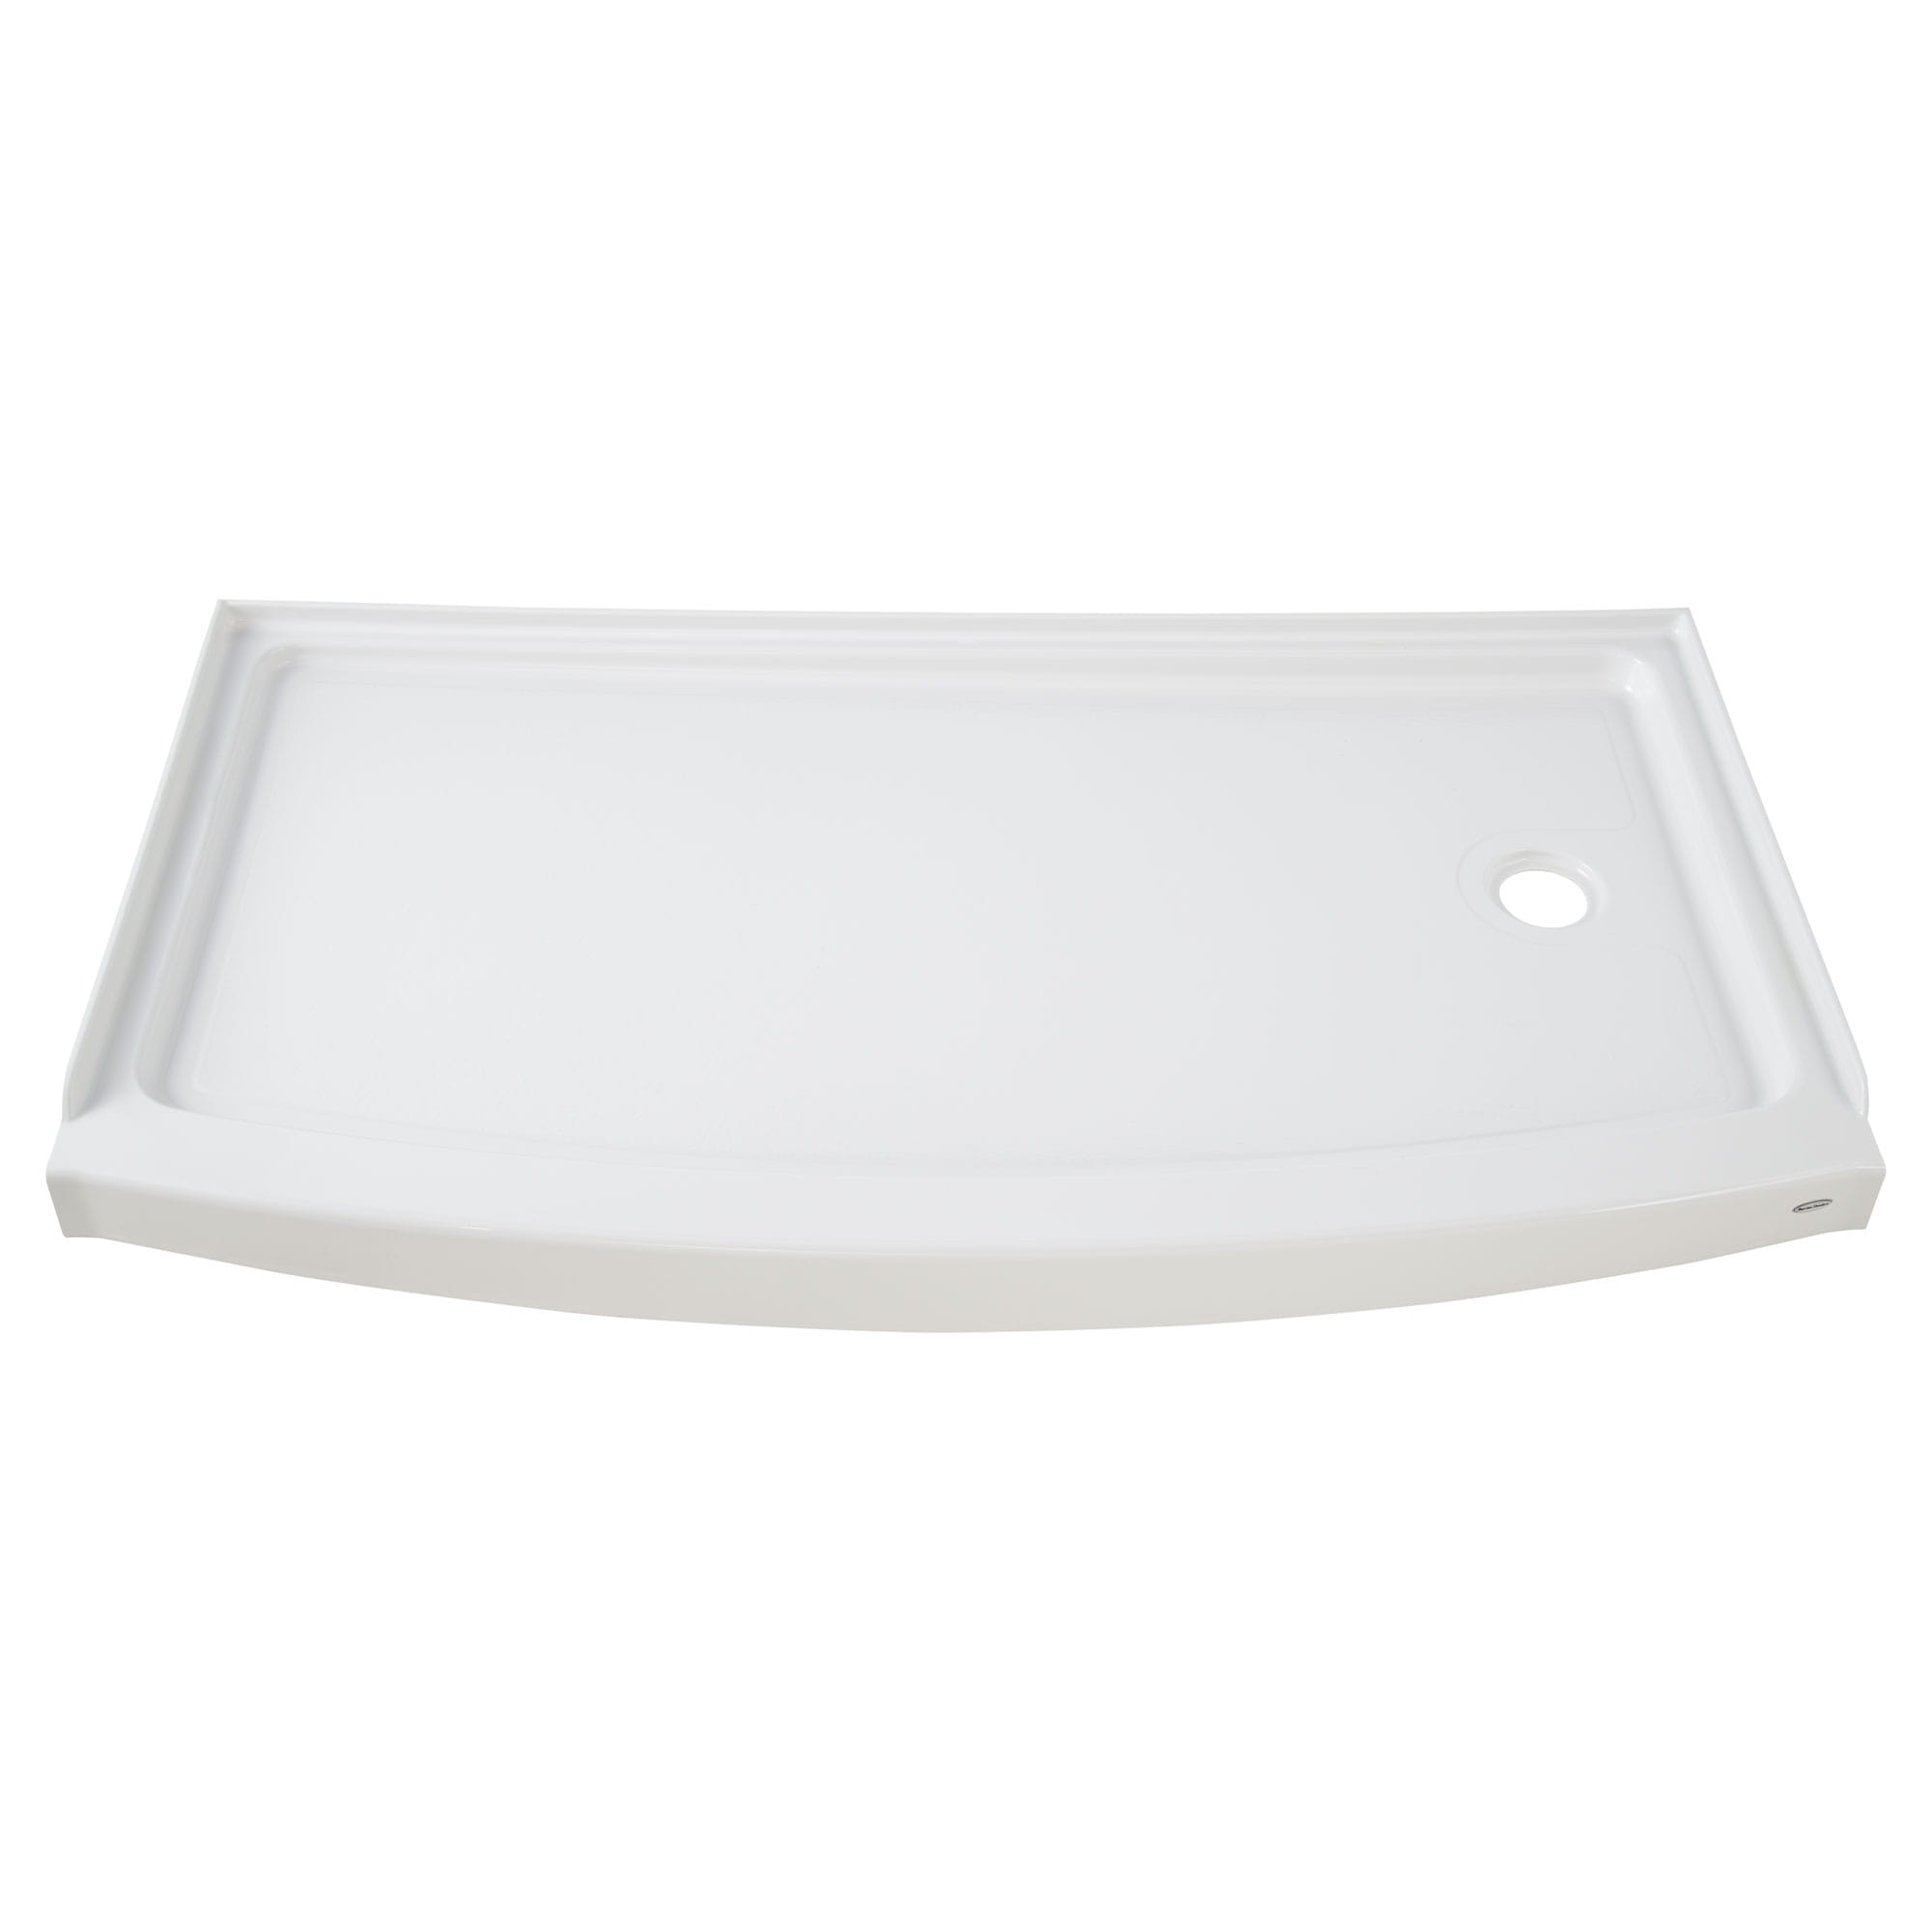 Ovation 60x30 inch Low Threshold Shower Base  Right Hand Drain ARCTIC